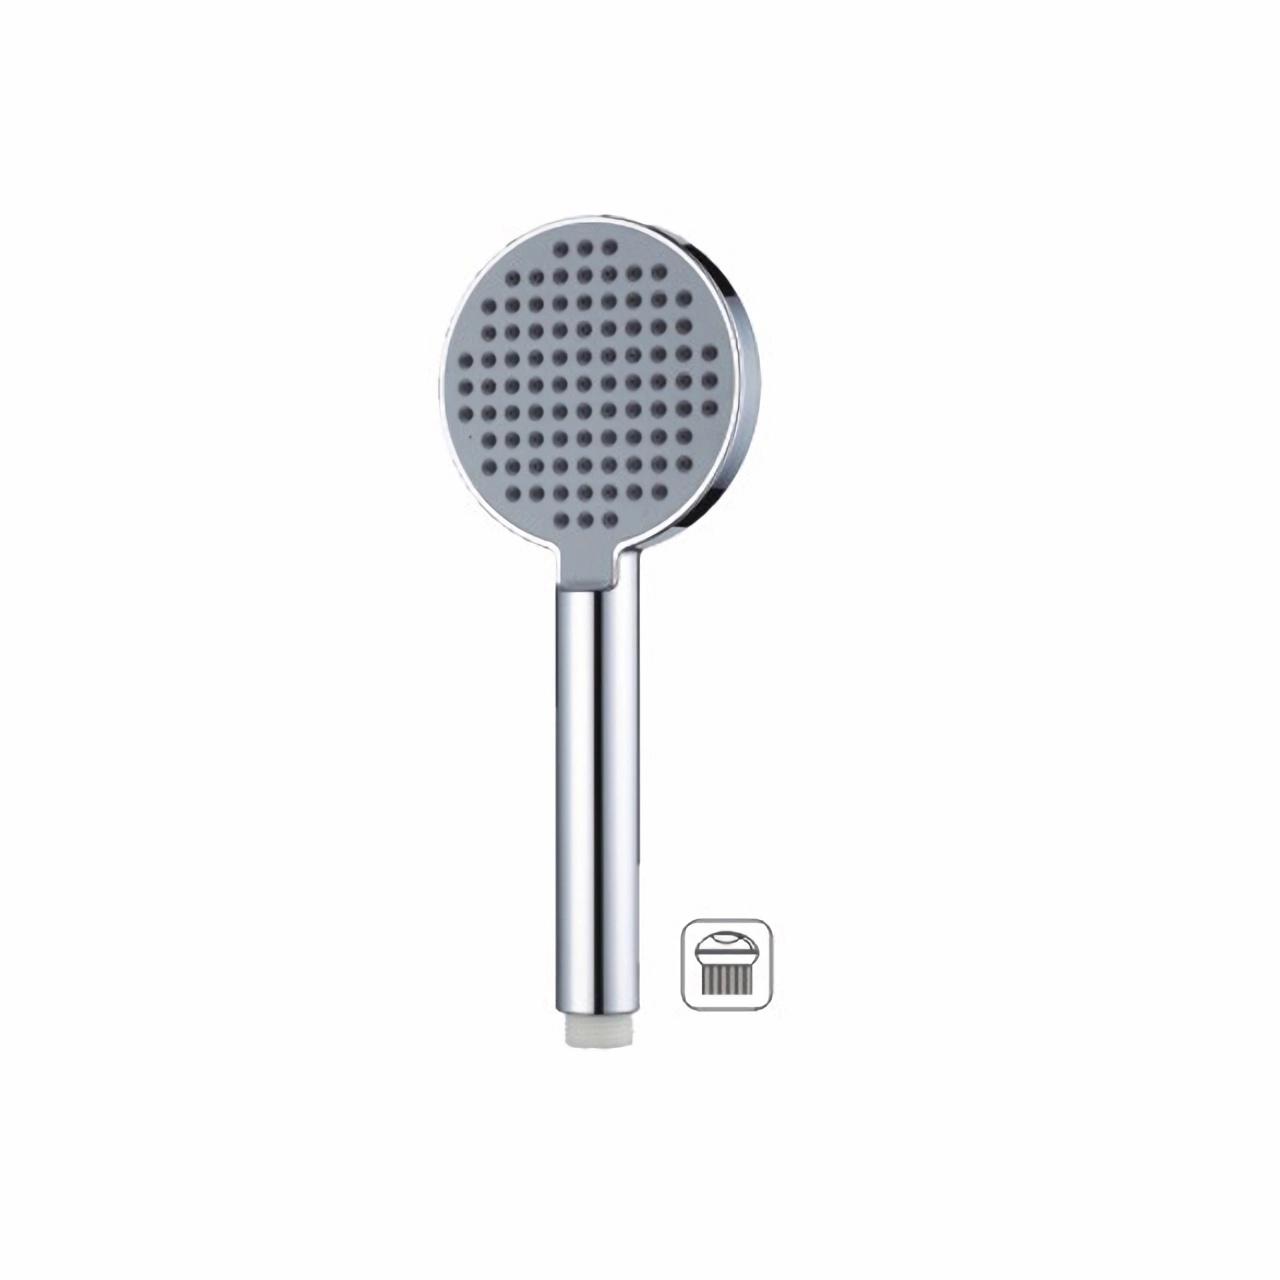 Are there specific considerations for choosing a bathroom shower head for homes with hard water?